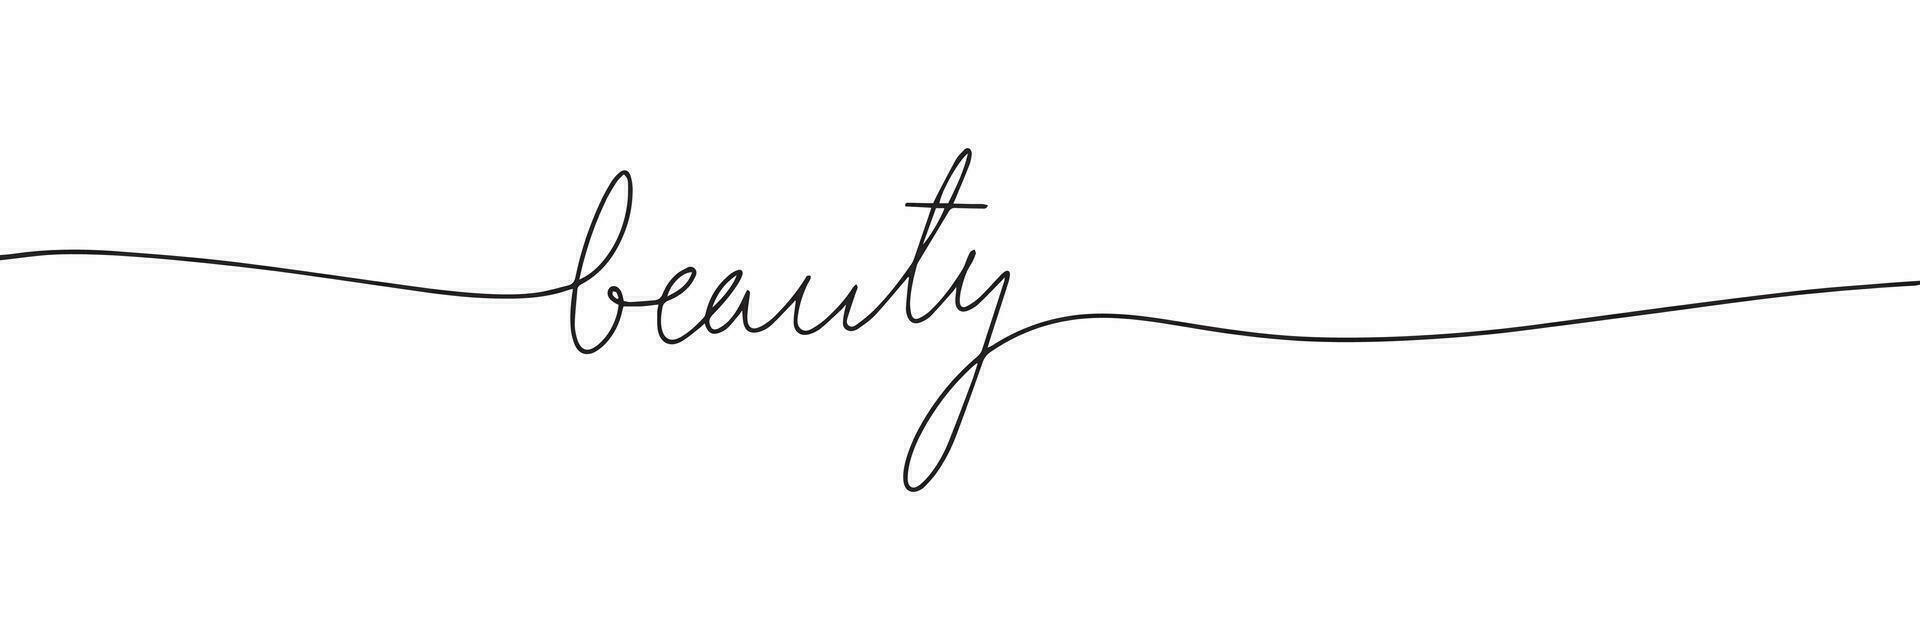 Beauty word handwriting calligraphy text. One line continuous phrase ...